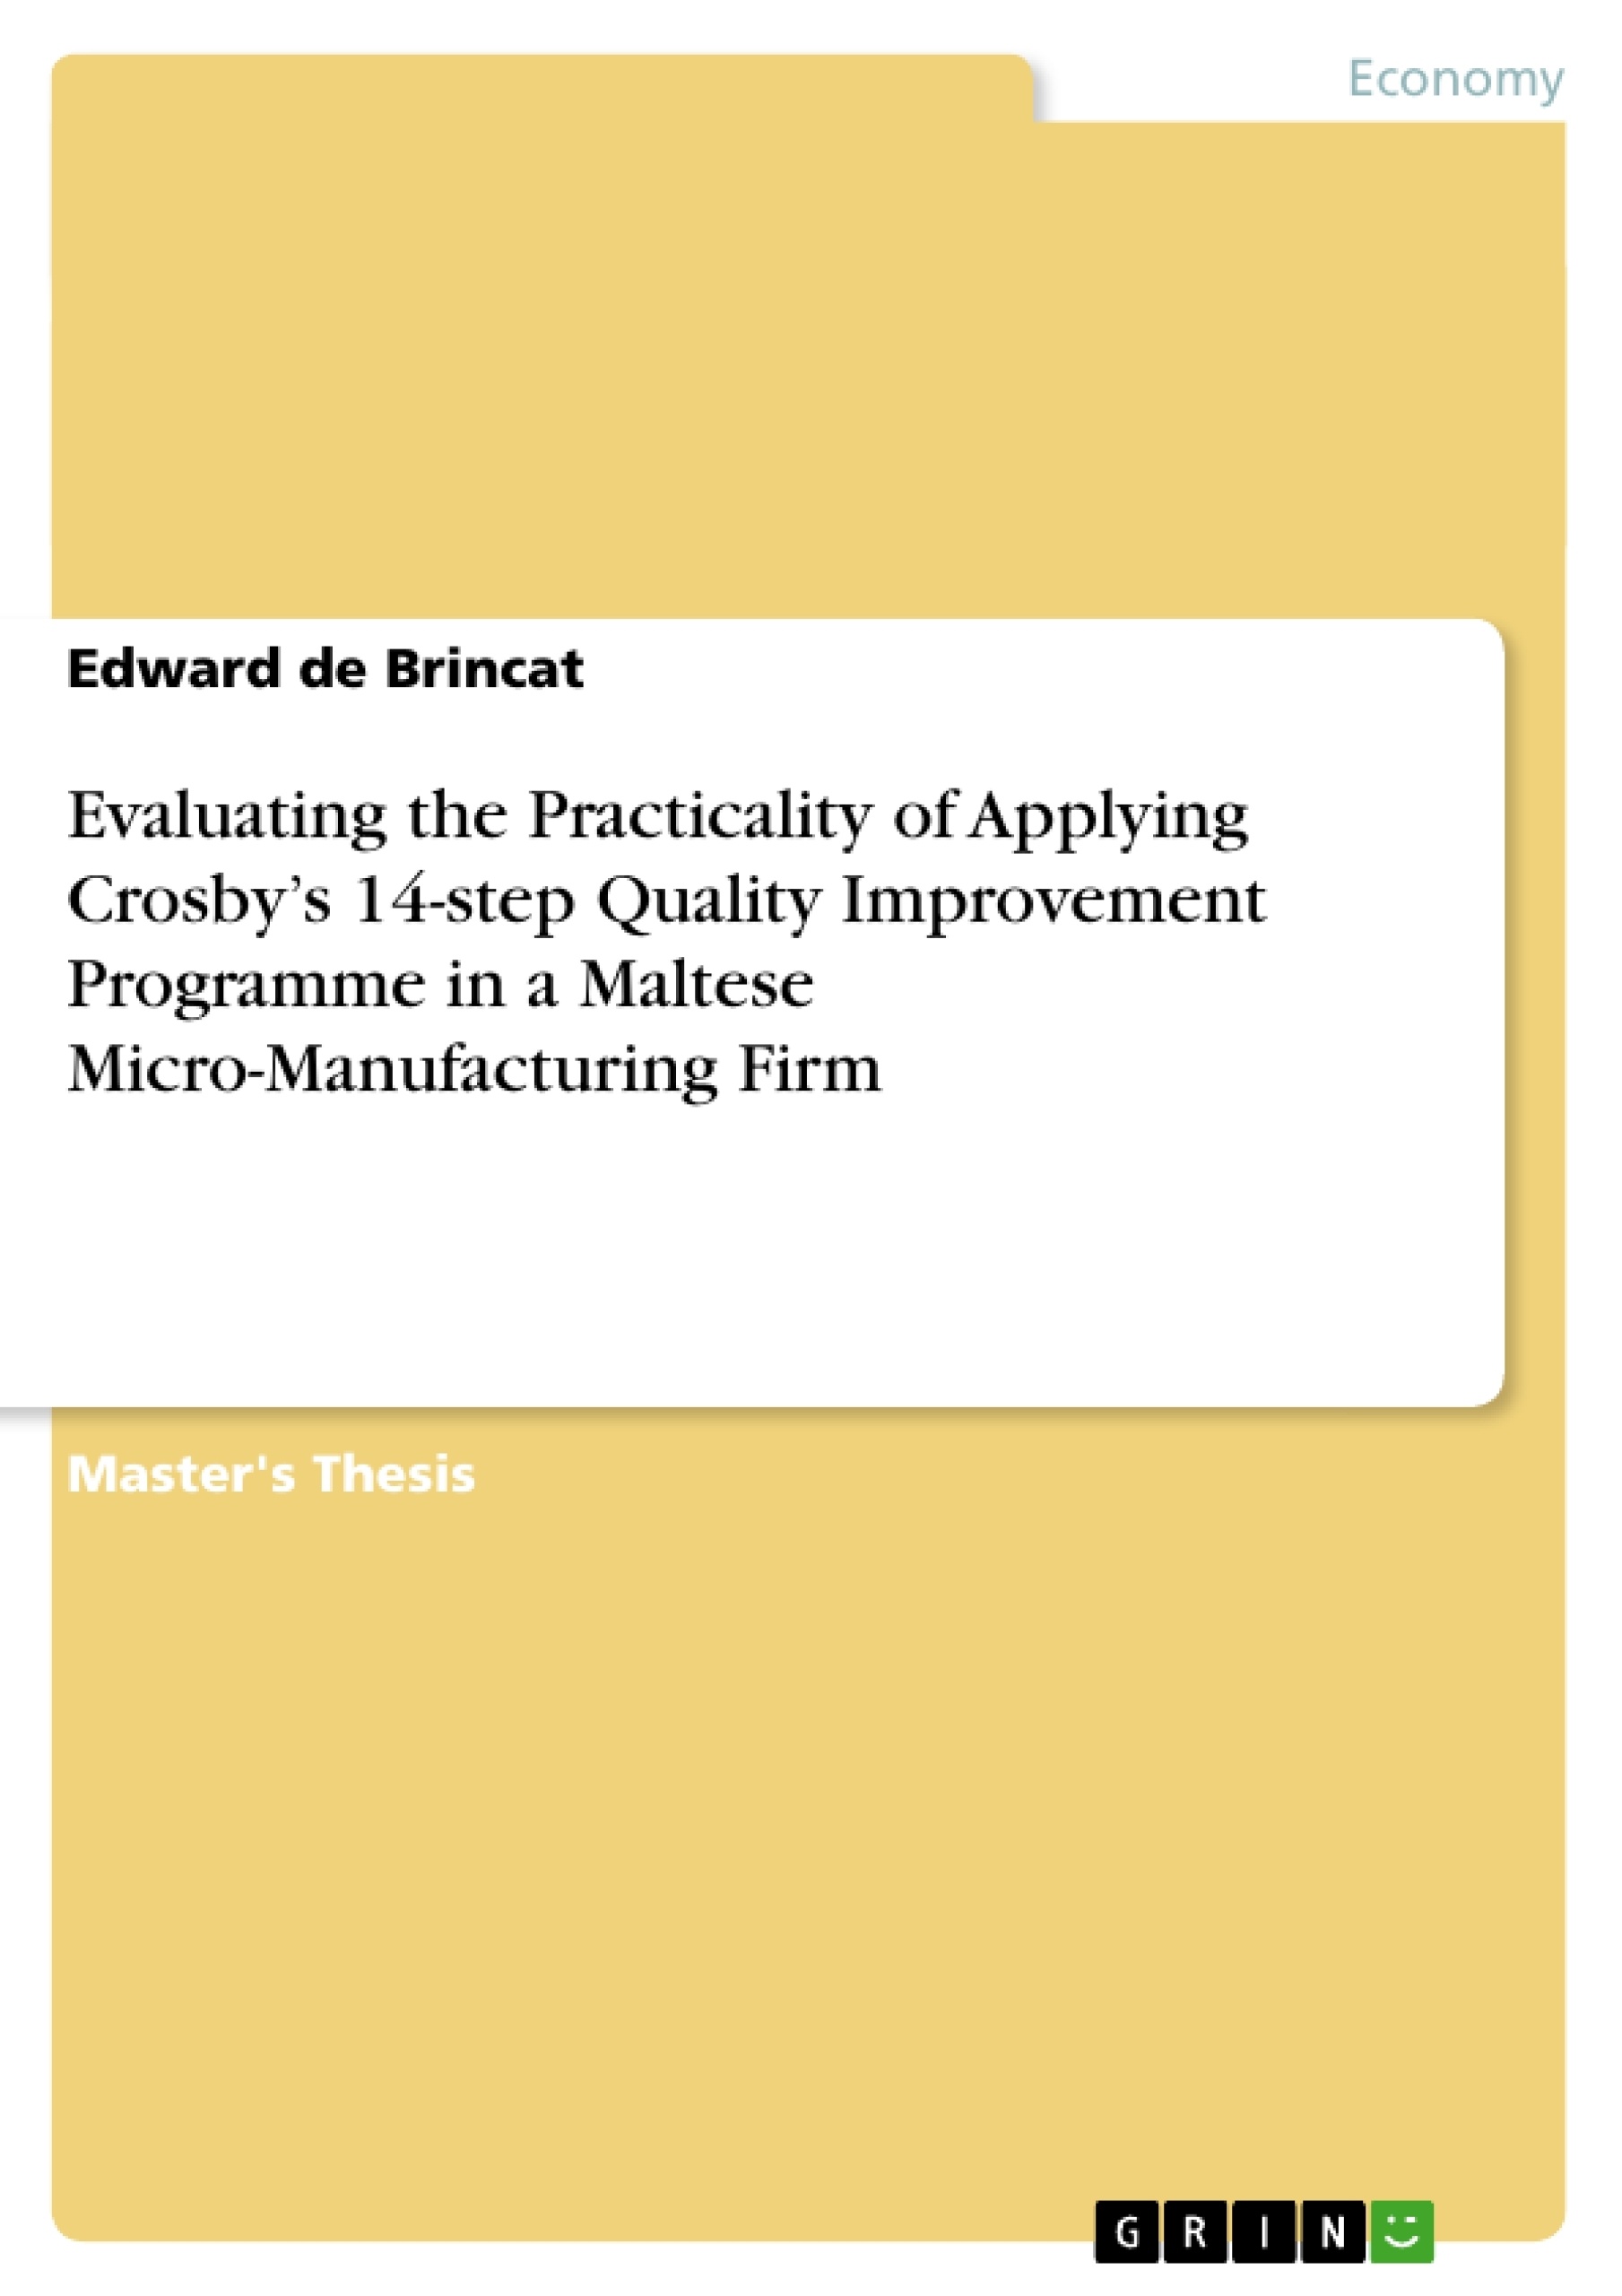 Title: Evaluating the Practicality of Applying Crosby’s 14-step Quality Improvement Programme in a Maltese Micro-Manufacturing Firm